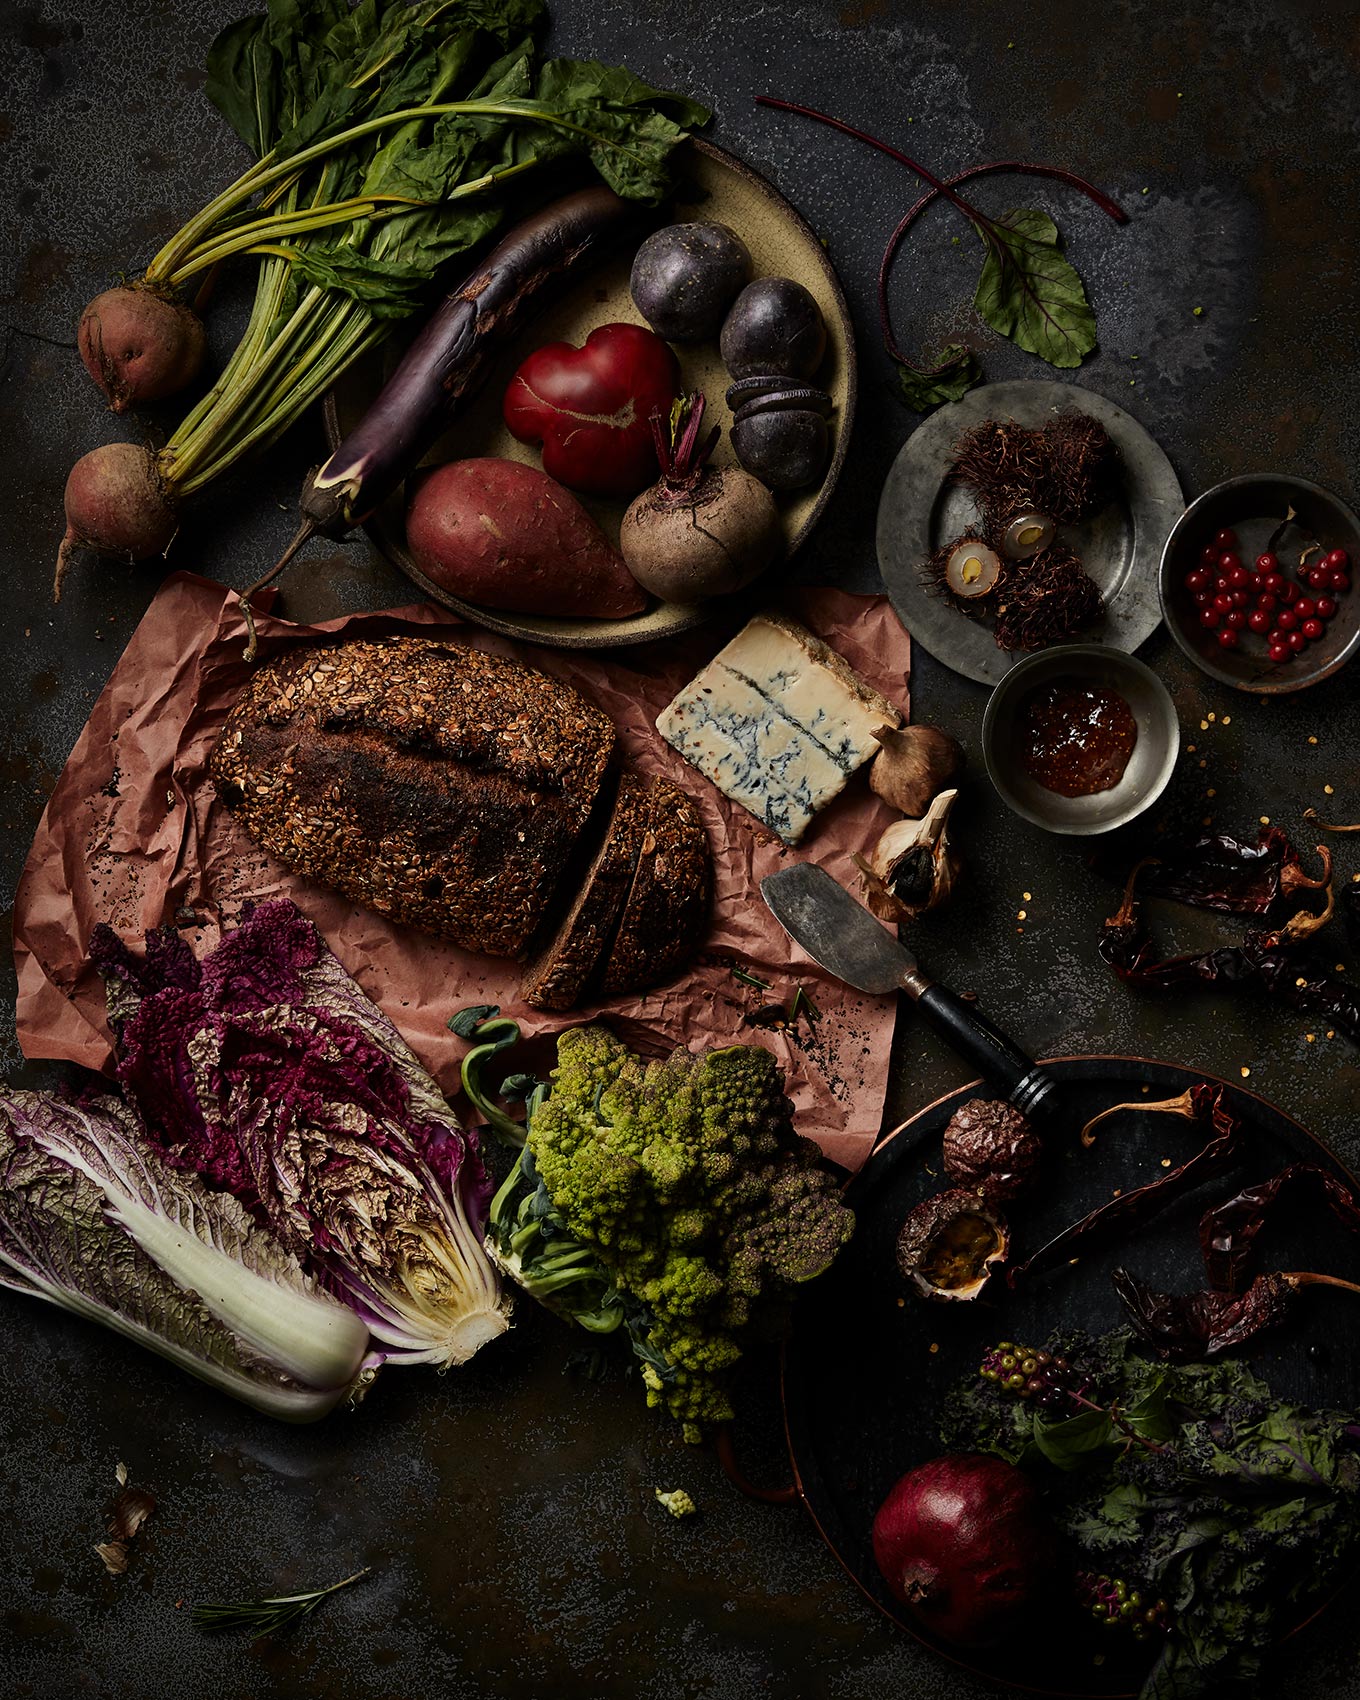 Rich dark earthy foods displayed on a rustic  neutral background.